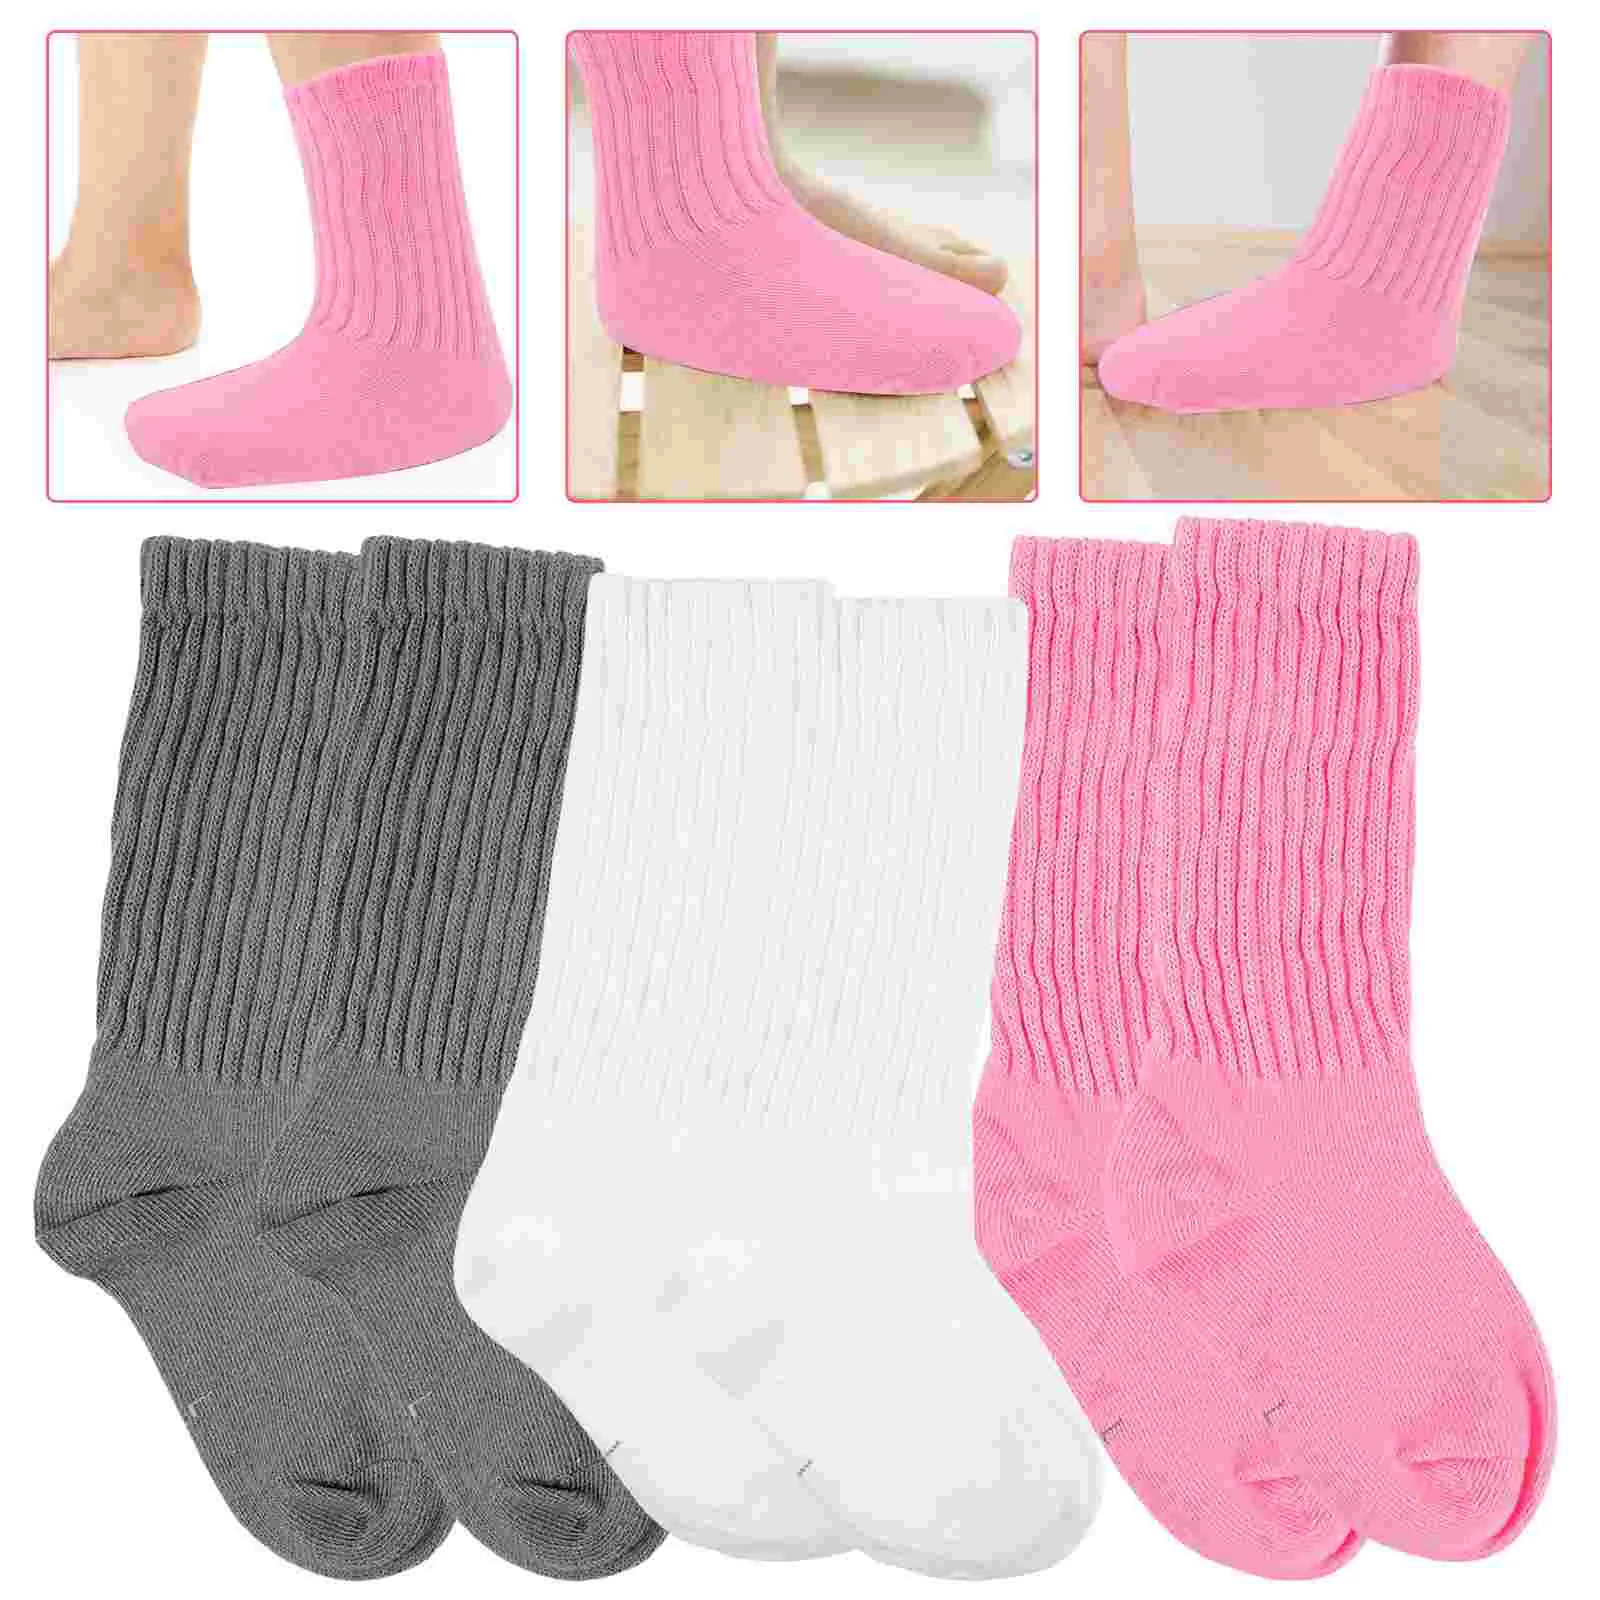 

3 Pairs Children's Socks Boys Ankle Childrens 5 Year Old Cotton Kid 6-8 Years Girls 4-6 Youth